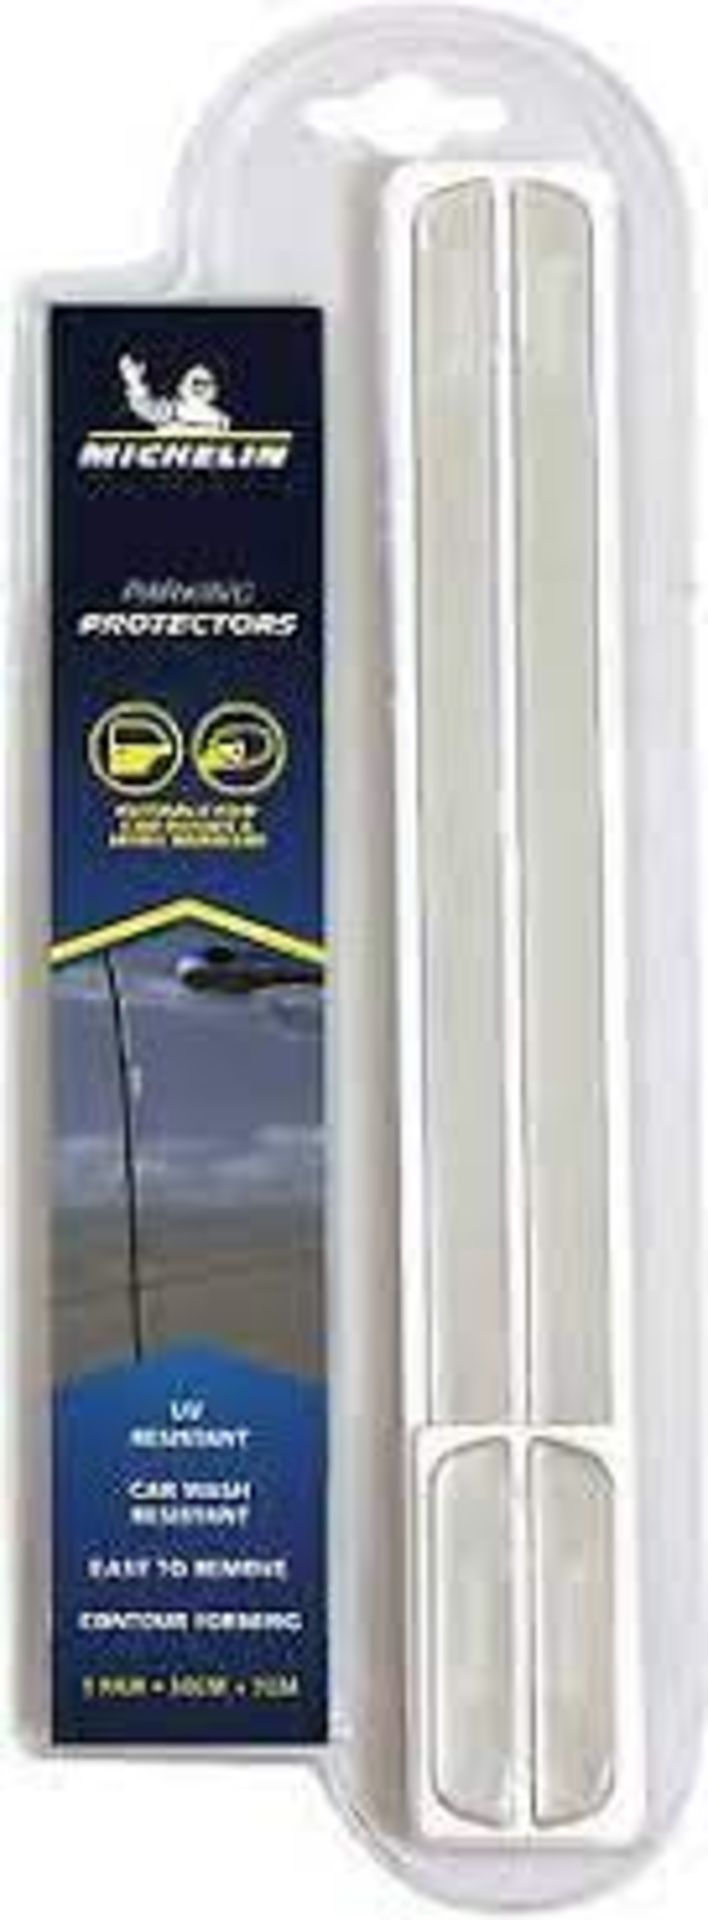 40 X NEW PACKS OF Michelin Parking Protectors Door and Wing Mirror Transparent. RRP £8.99 PER - Image 2 of 2